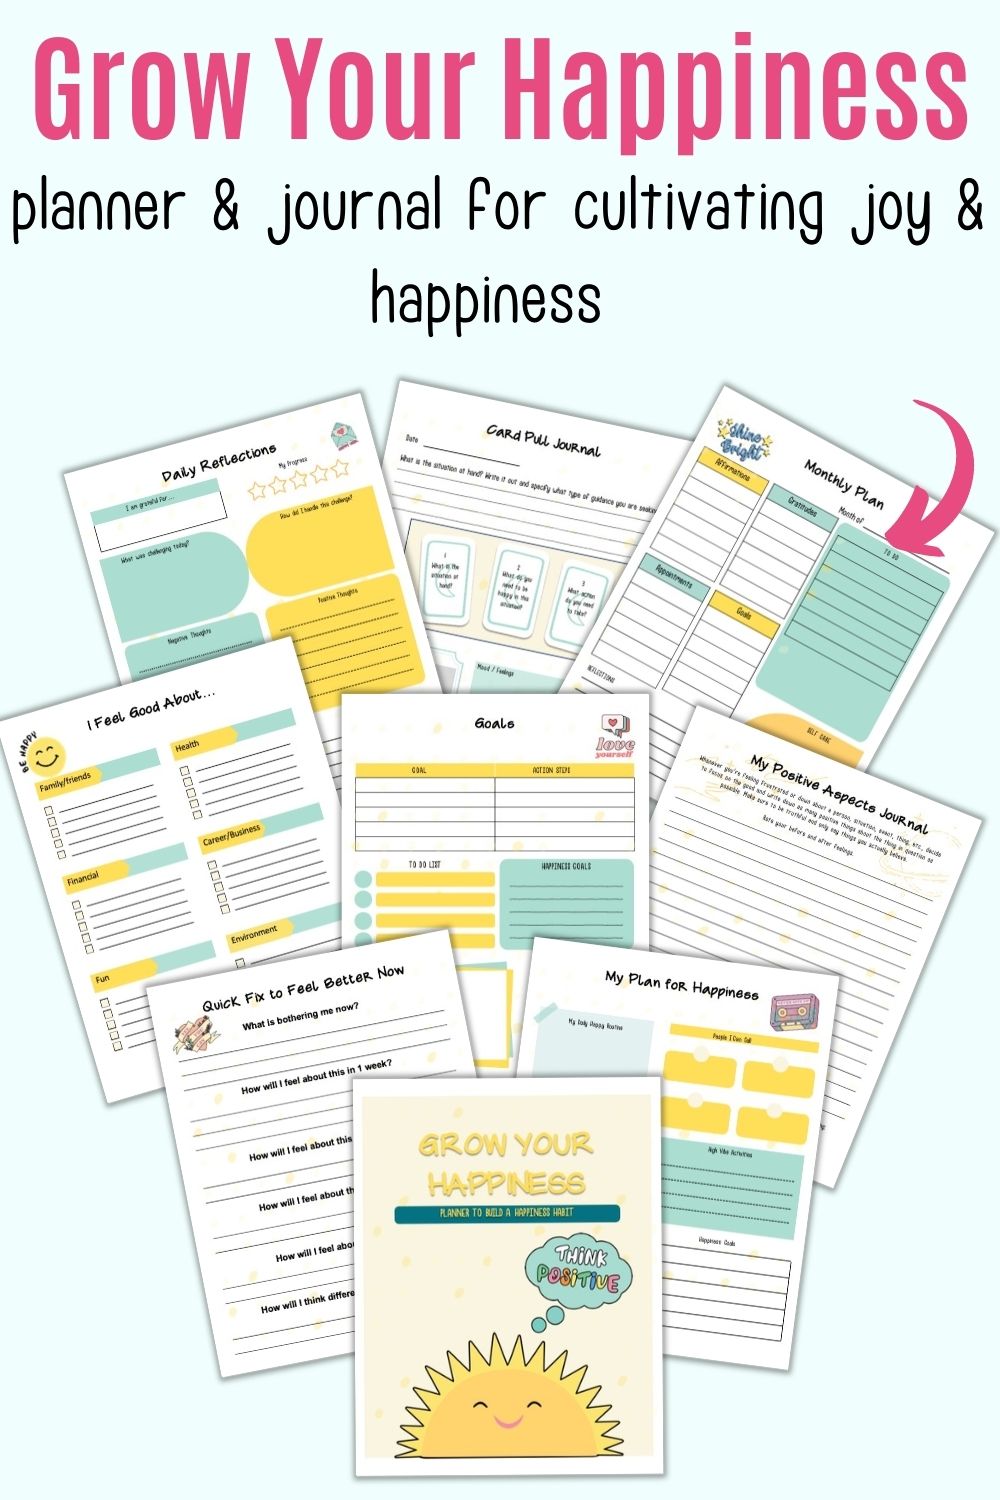 Text "grow your happiness planner and journal for cultivating joy and happiness" with a preview of nine interior planner pages with yellow and teal colors 